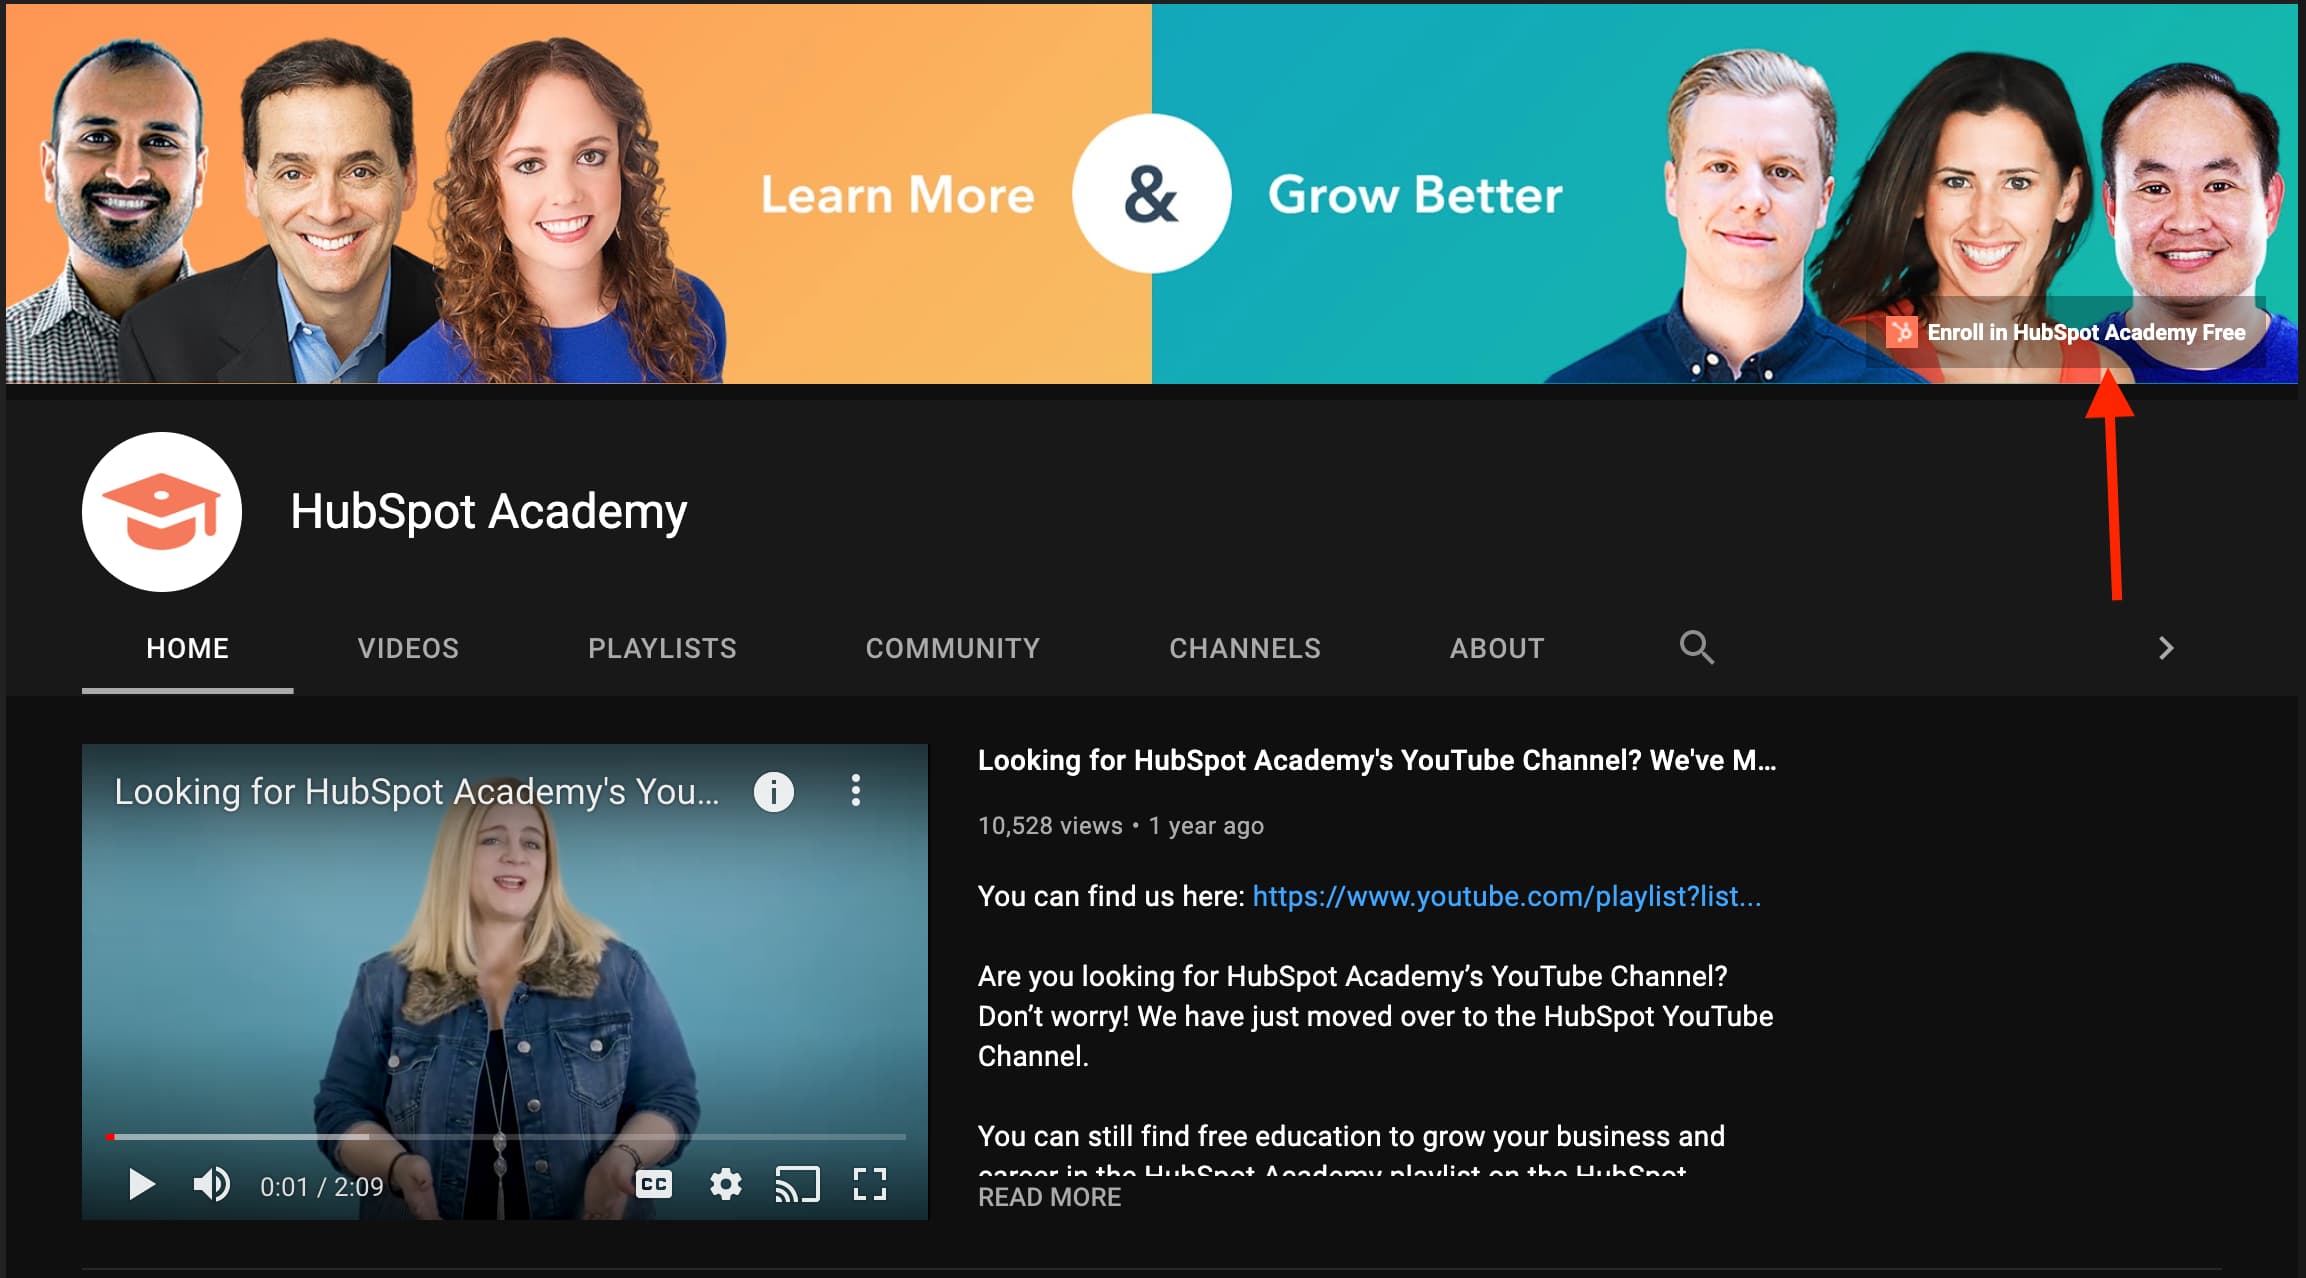 hubspot academy youtube channel sign up link CTA